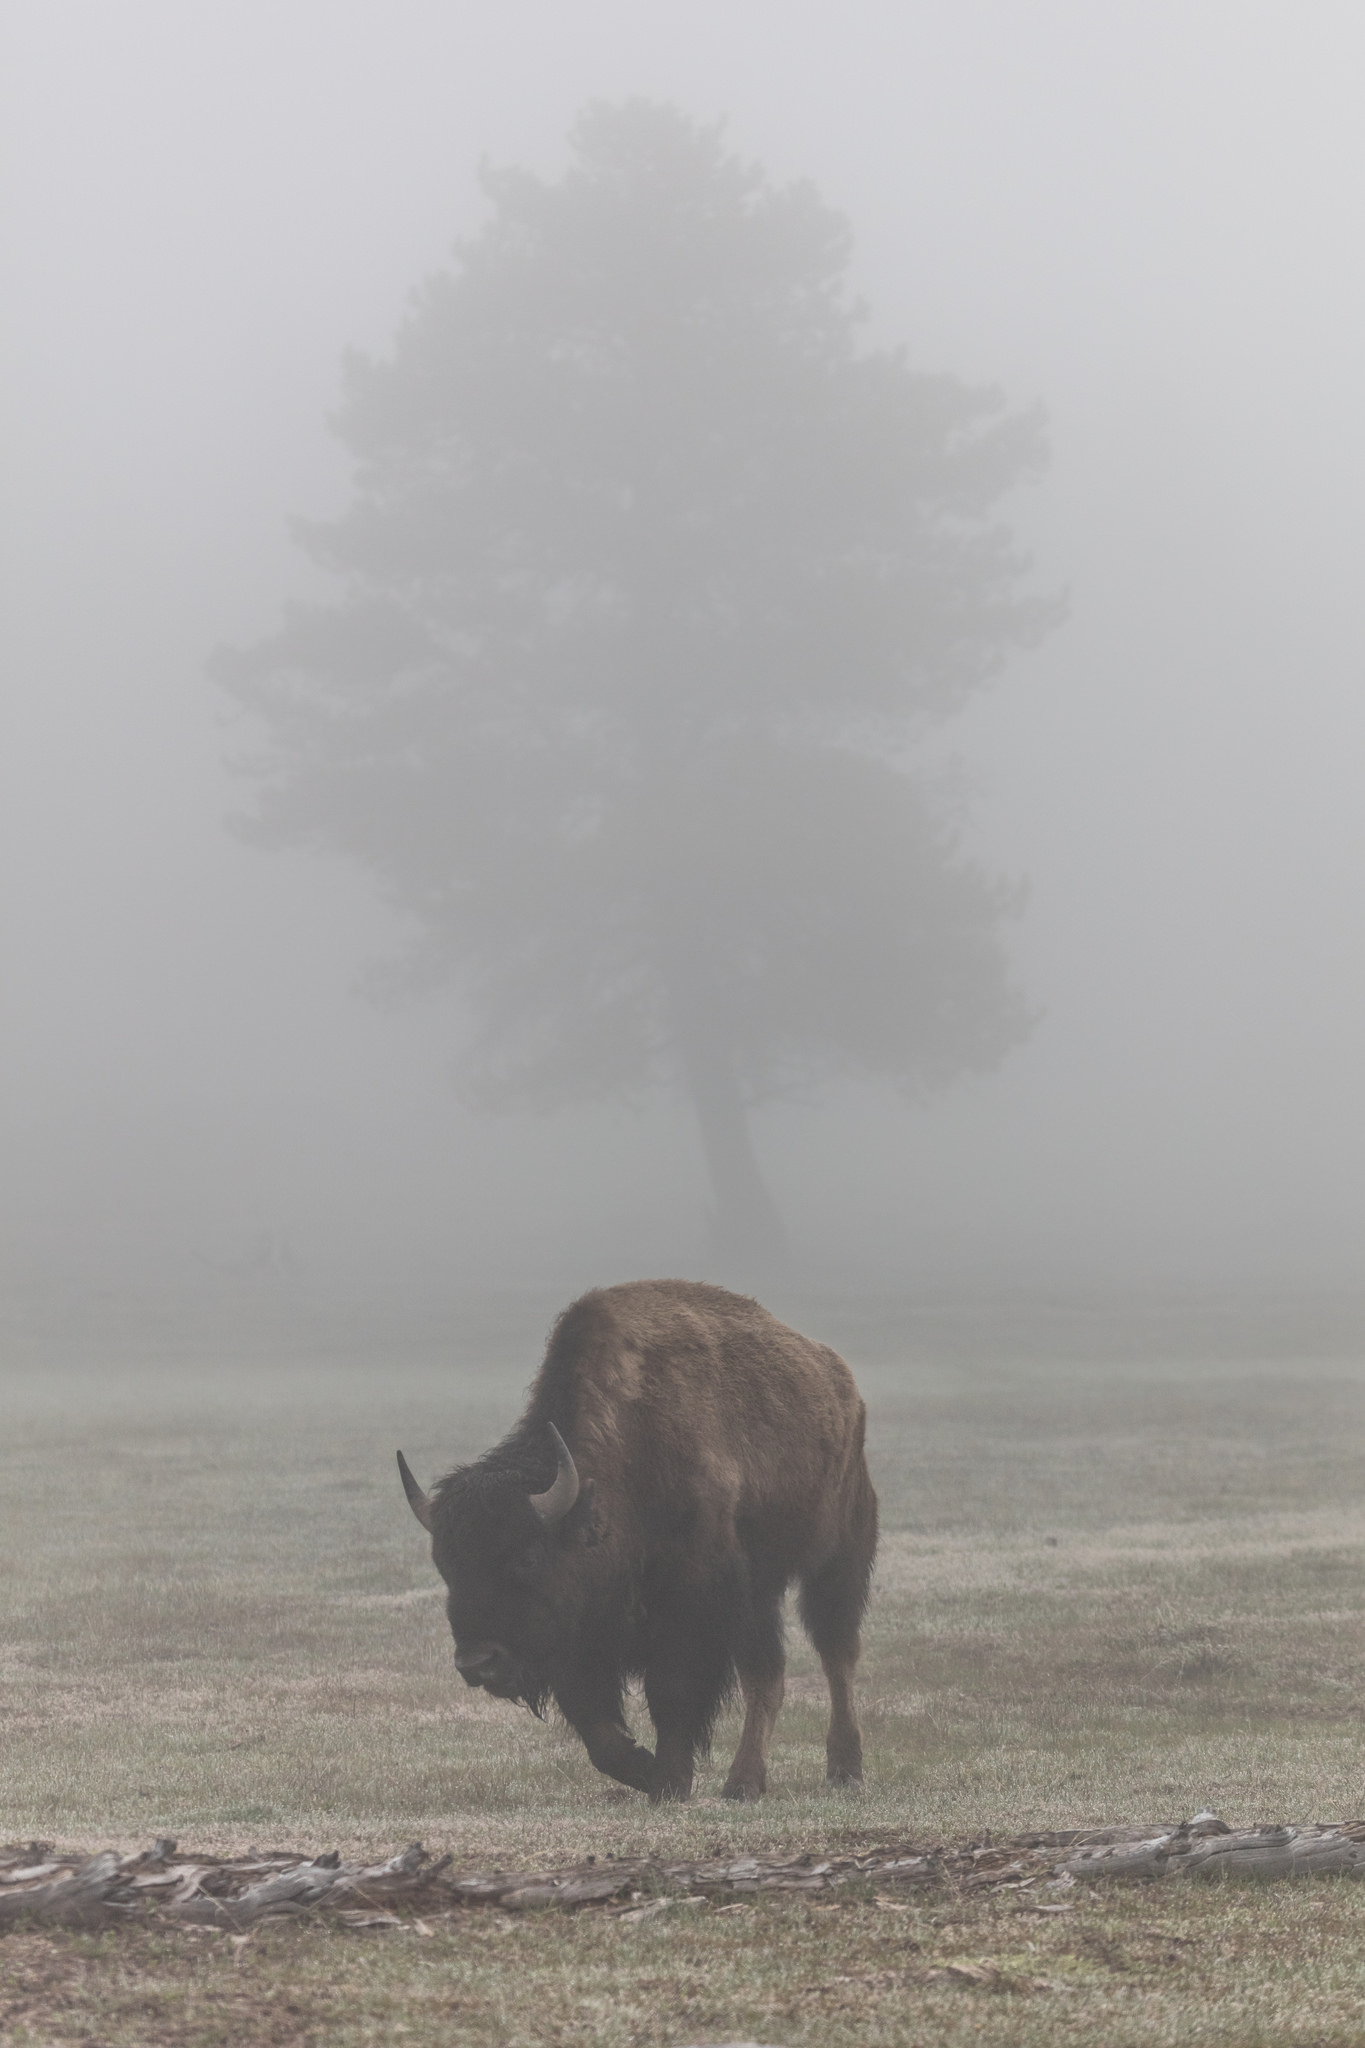 "A bison in the fog at Yellowstone National Park. There is the grey silhouette of a large tree in the background, barely visible through the fog."